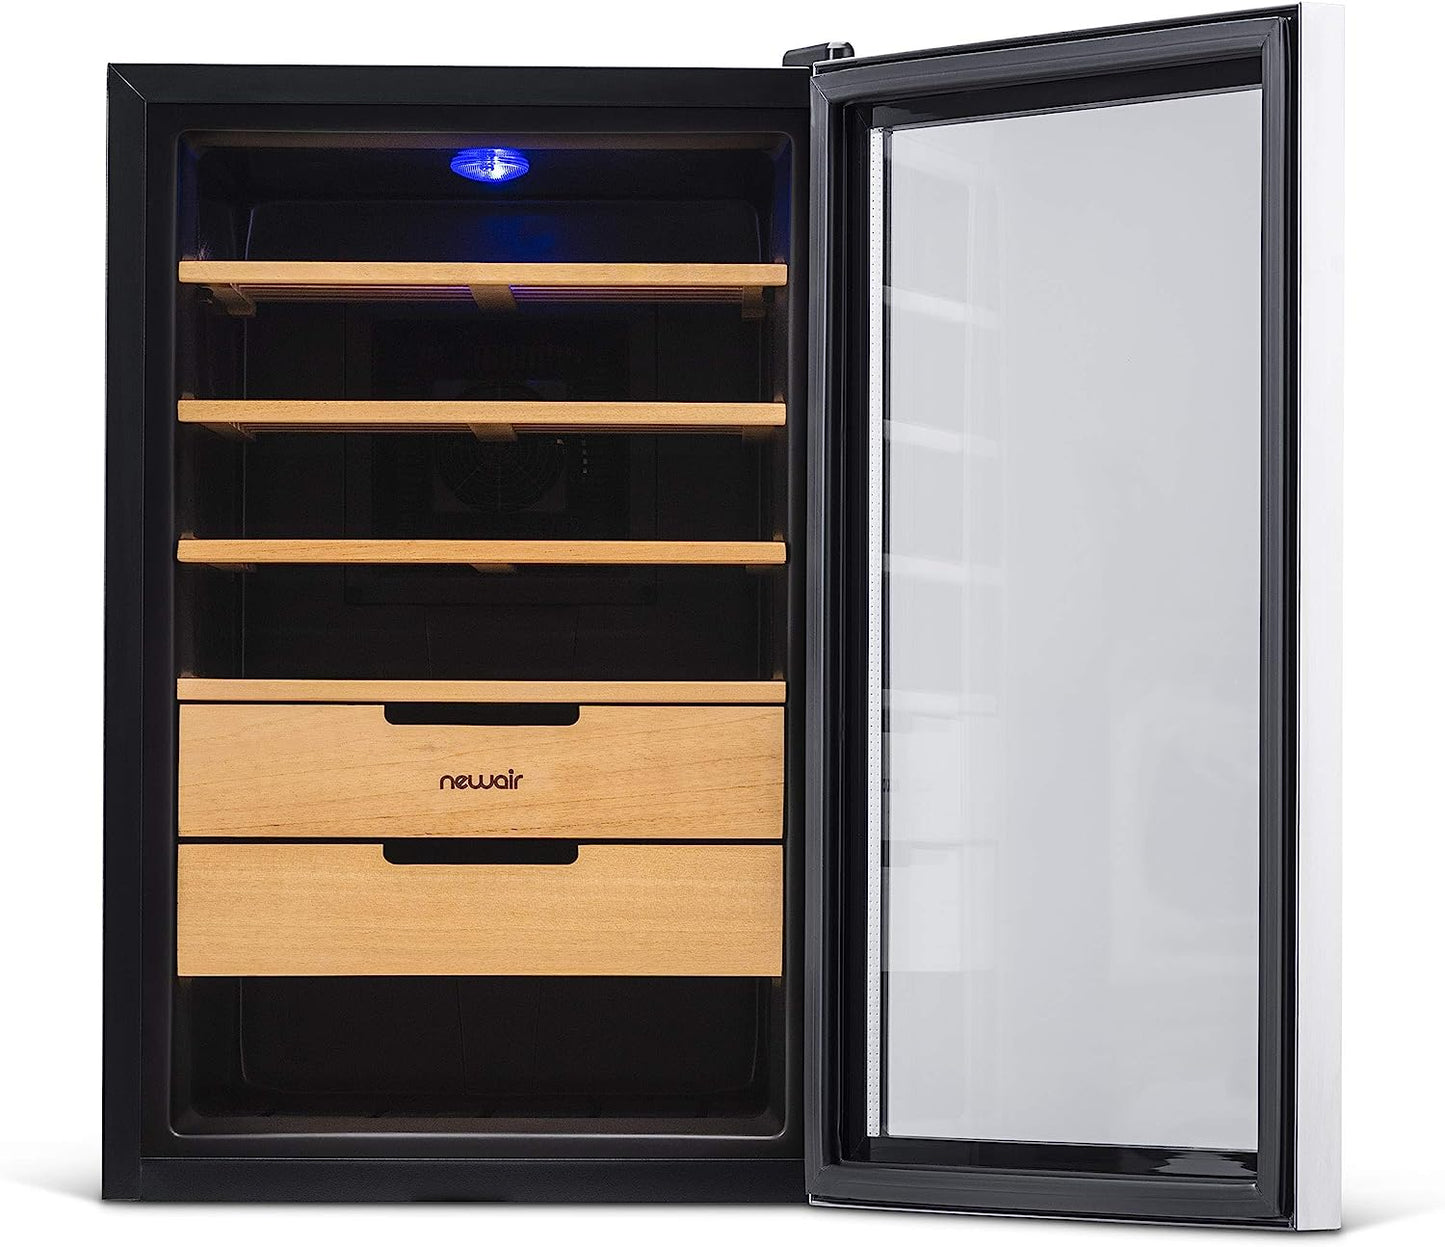 climate-controlled-cigar-humidor-cc-300h-stainless steel-4